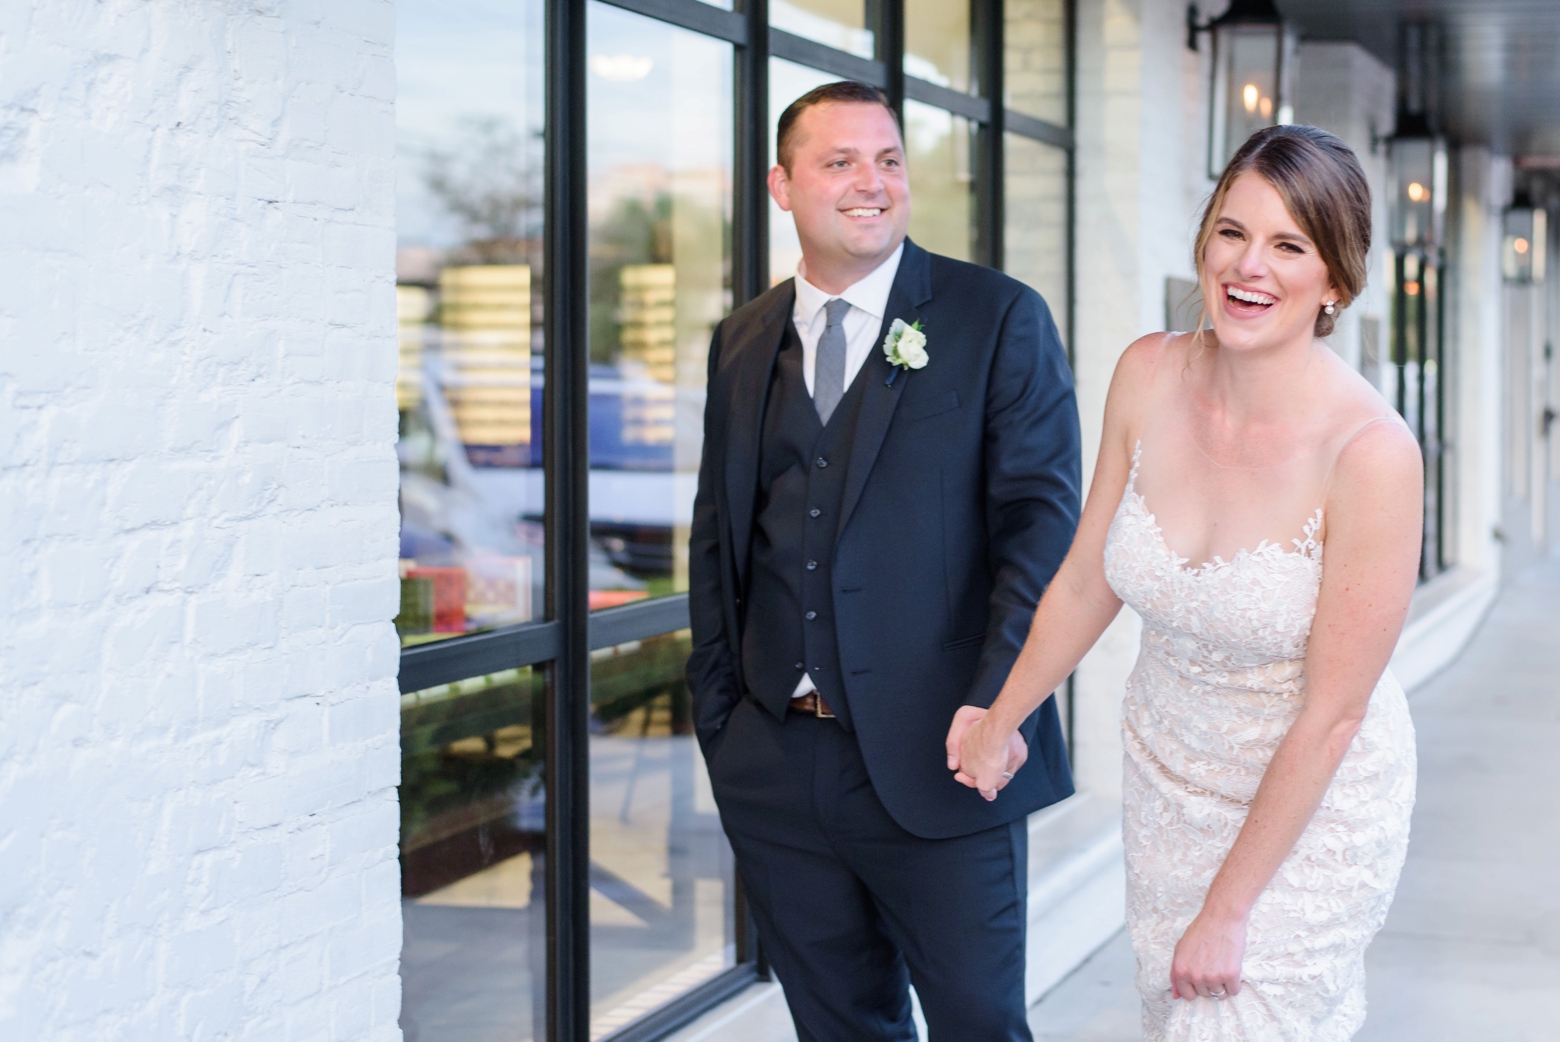 A bride laughs while holding her grooms hand outside the oxford exchange wedding reception venue